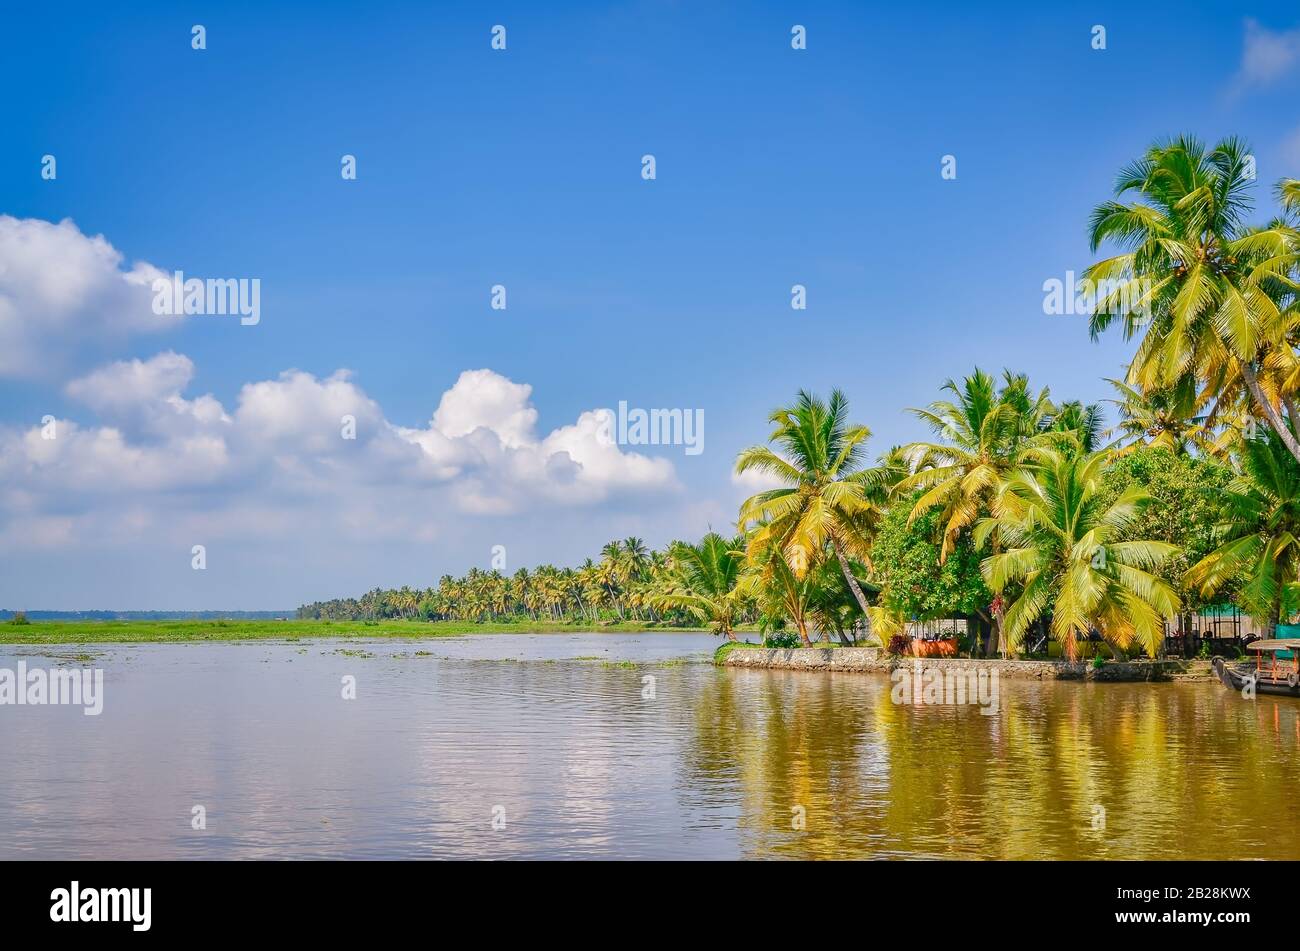 Scenery of Coconut Trees, Backwaters and a clear blue sky. From Kerala, India. Stock Photo